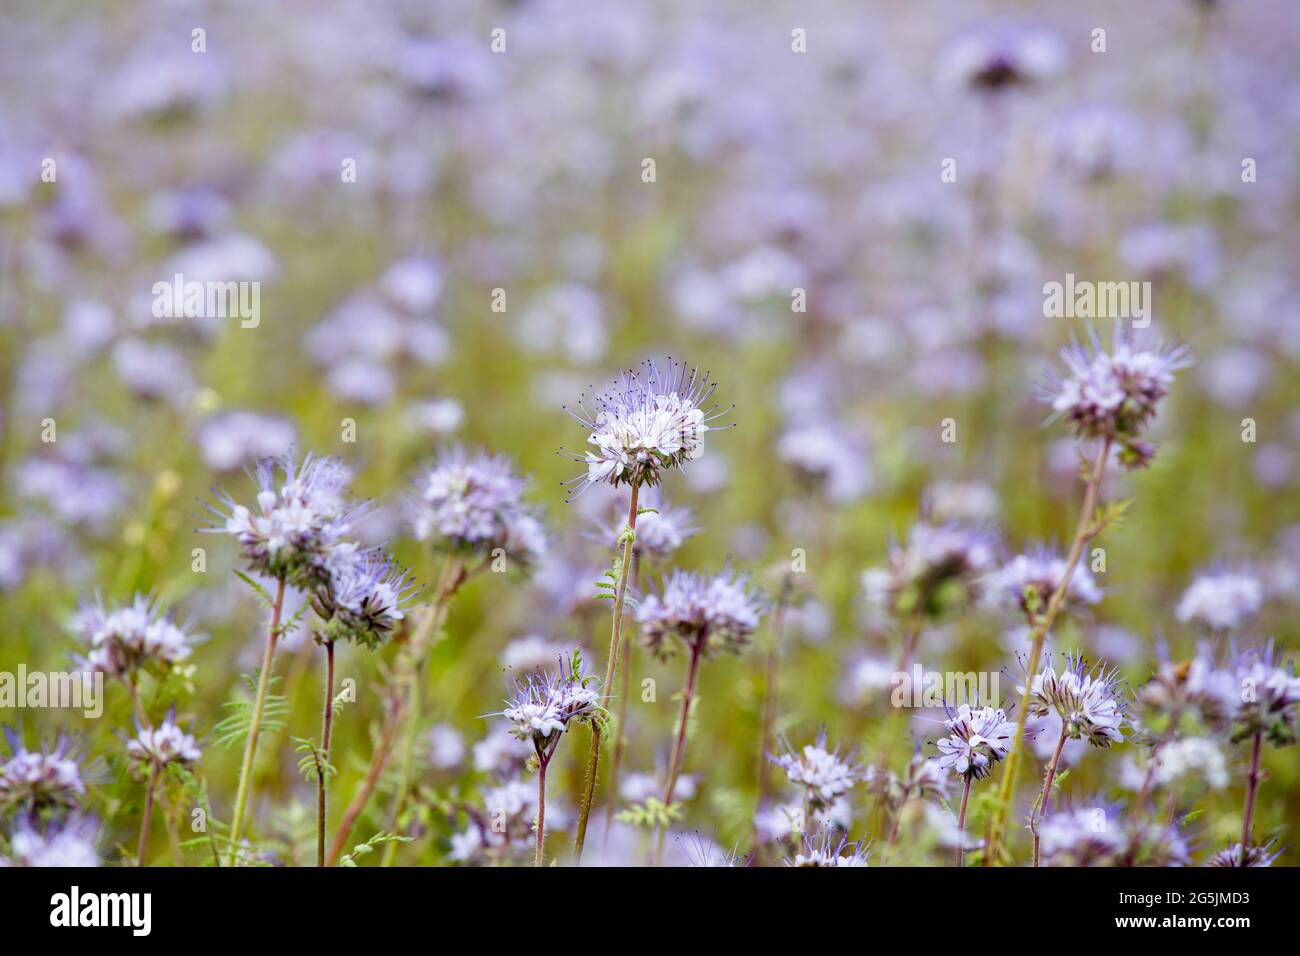 Phacelia tanacetifolia also known lacy phacelia, blue tansy or purple tansy flower field, planted for honeybees. Outdoors on warm summer day. Stock Photo